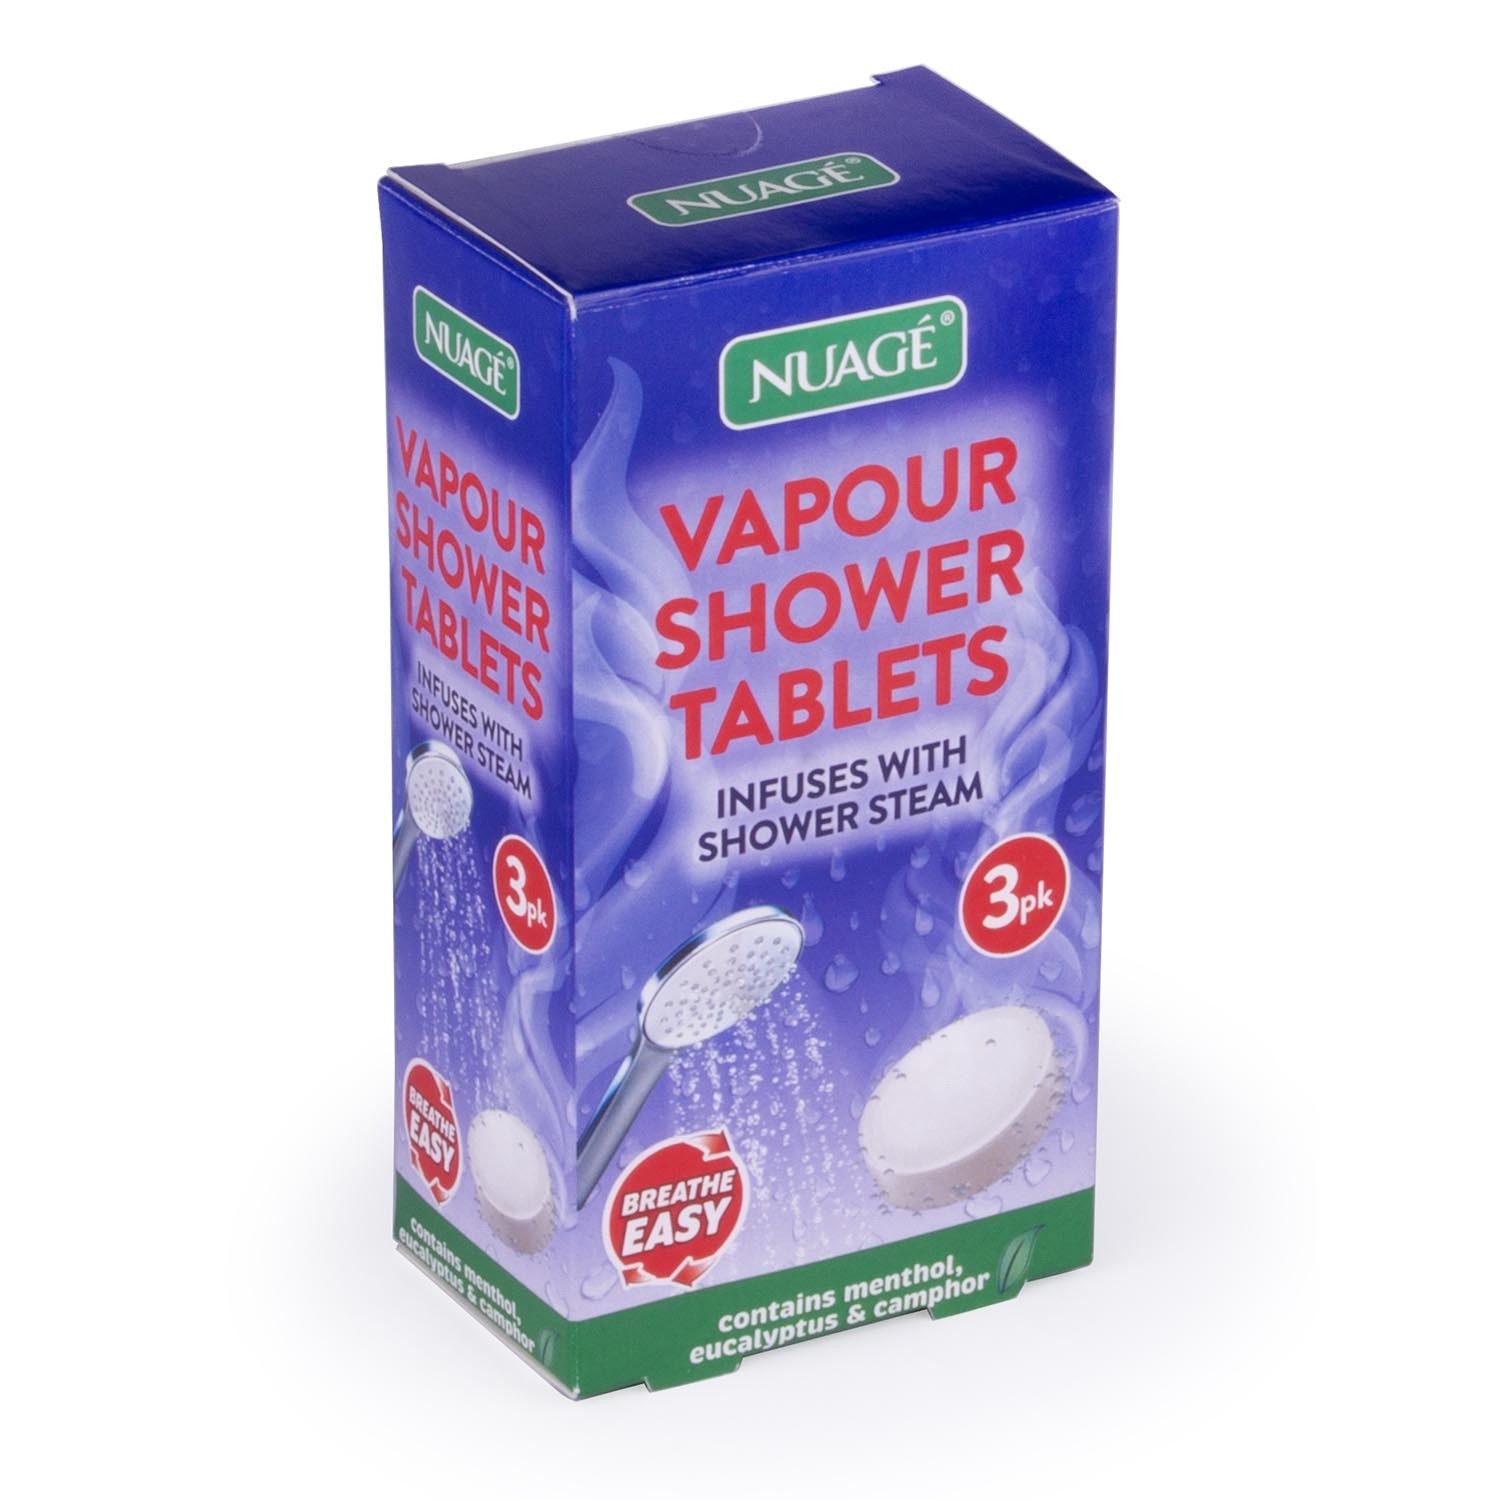 Pack of 3 Nuage Vapour Shower Tablets - White Image